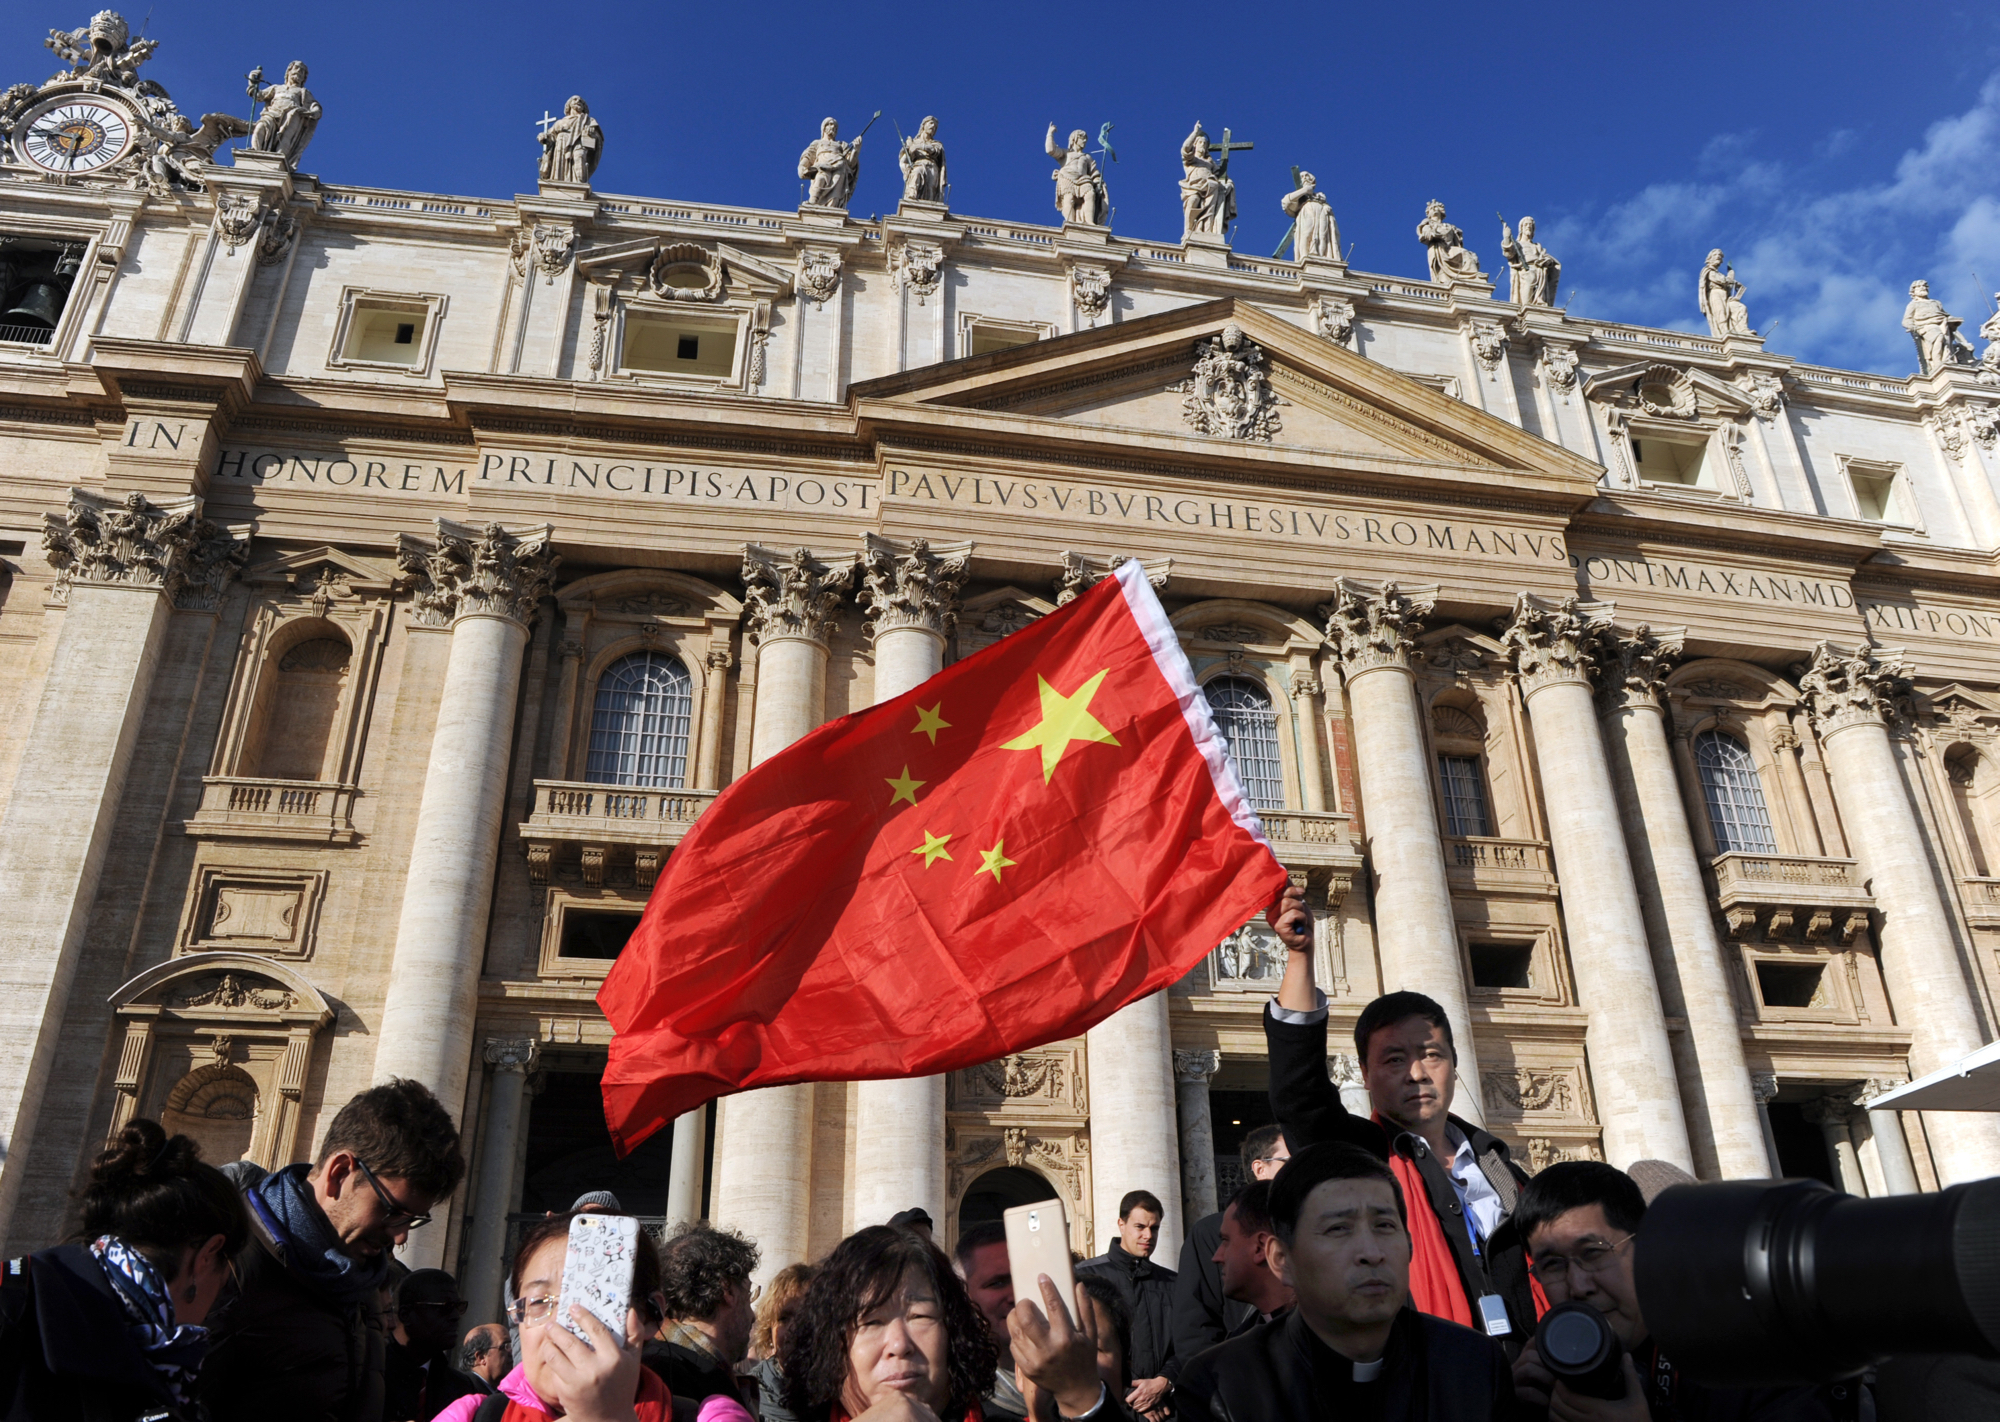 Chinese state control over religions tightened